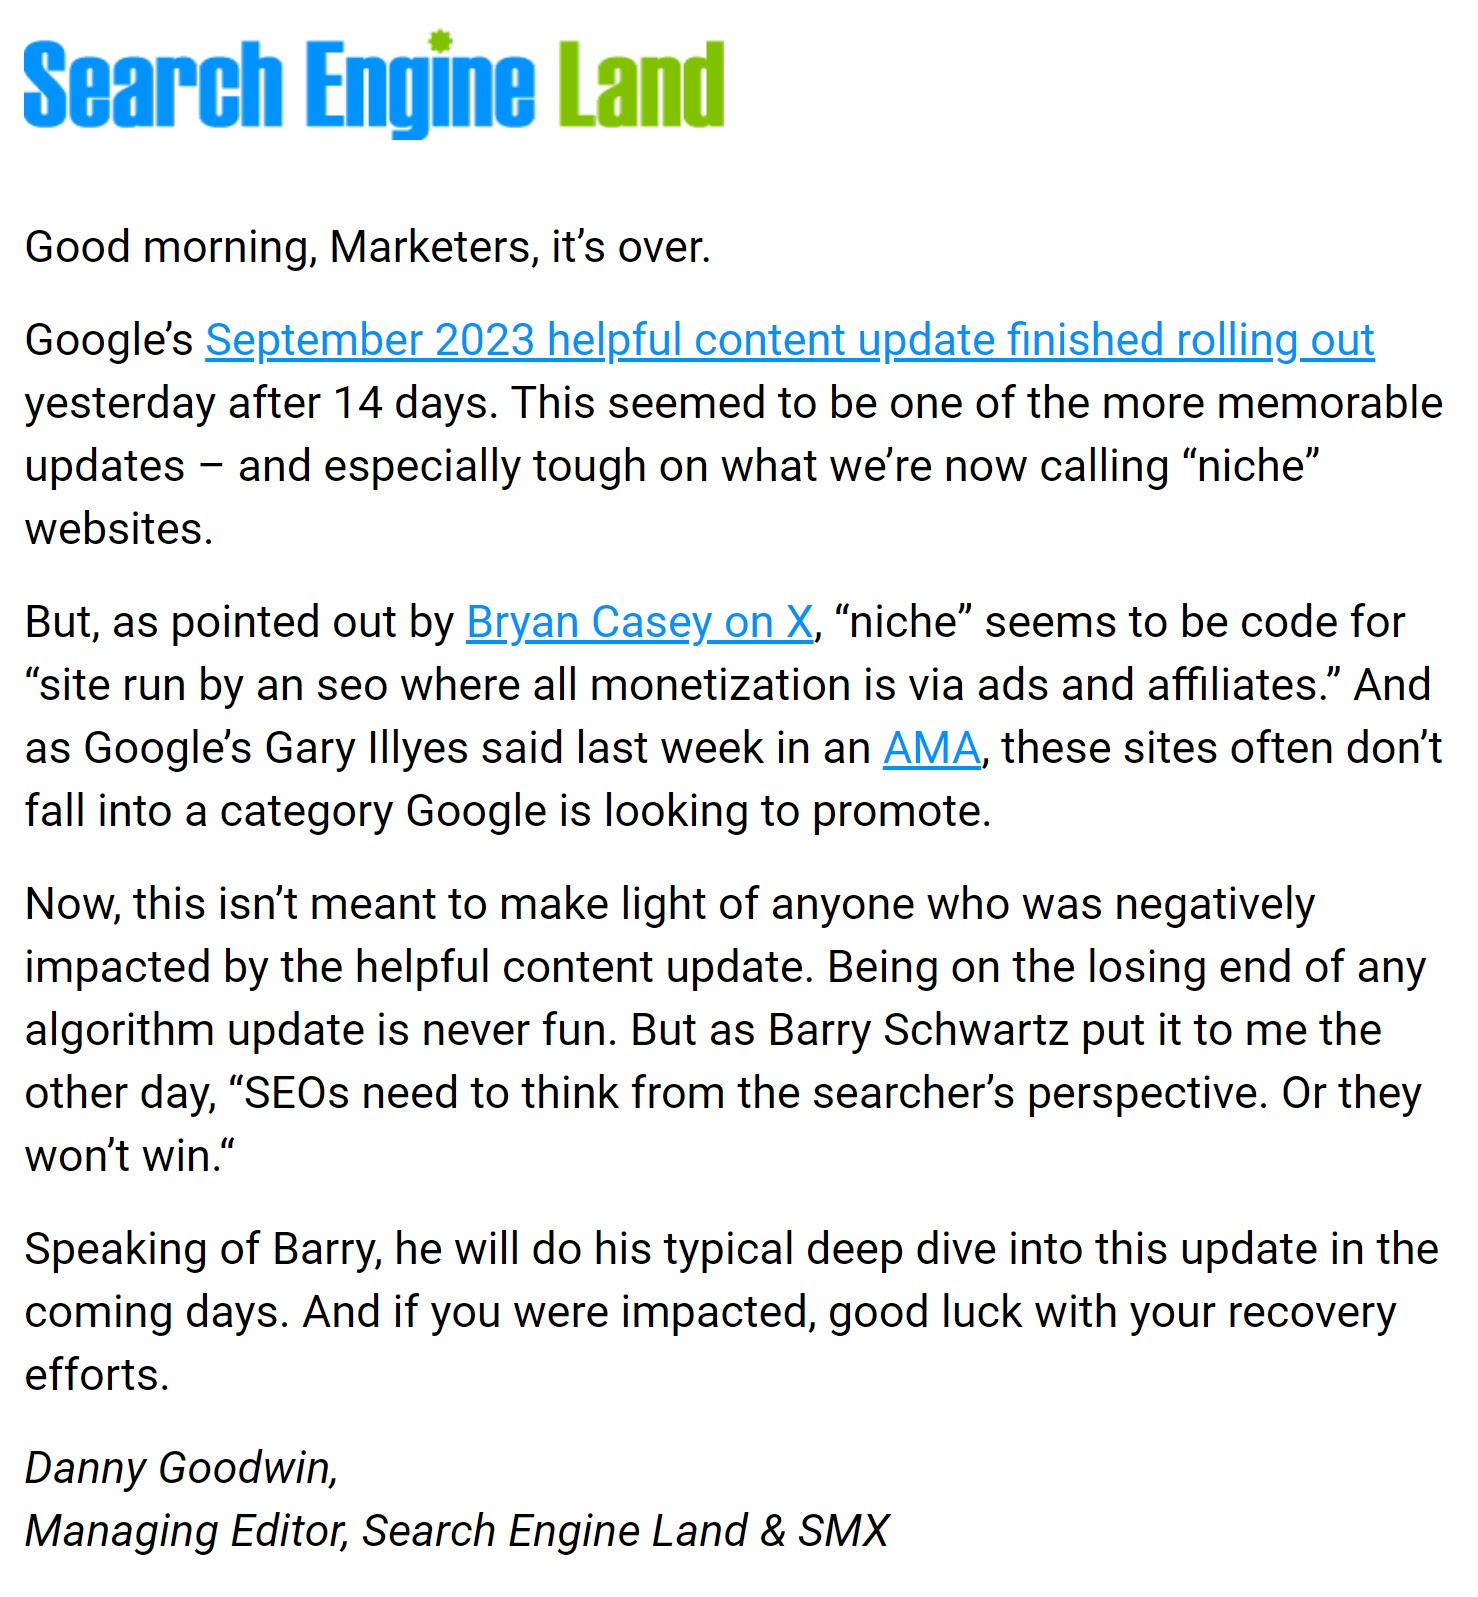 Search Engine Land’s daily newsletter